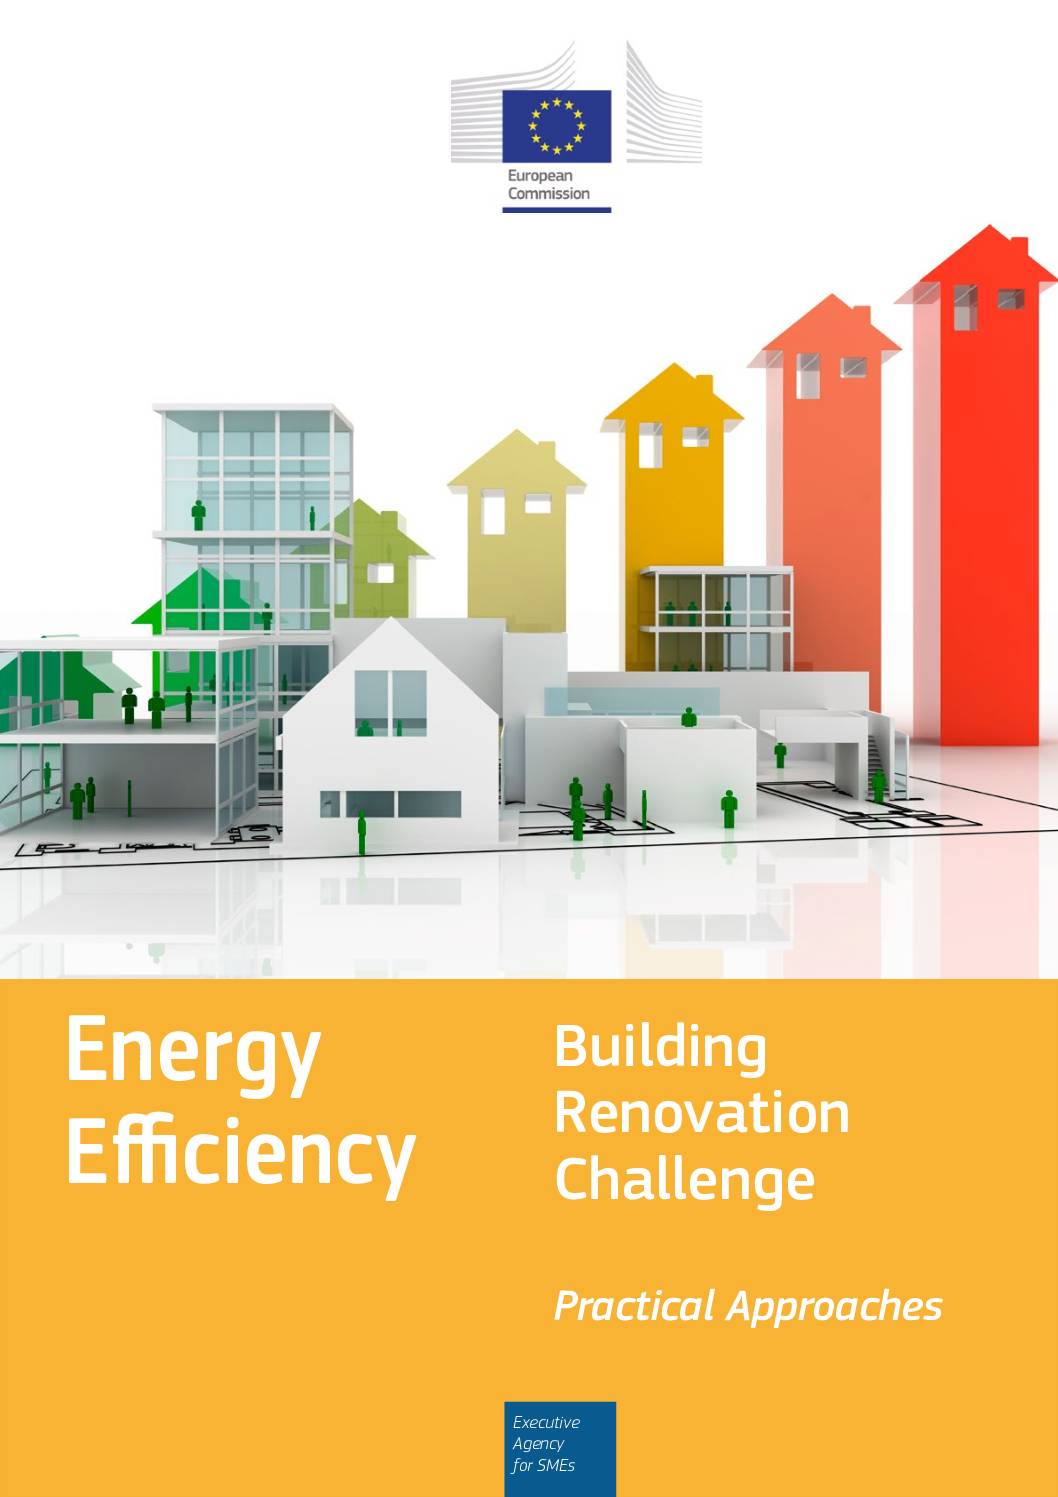 Practical Approaches to the Building Renovation Challenge